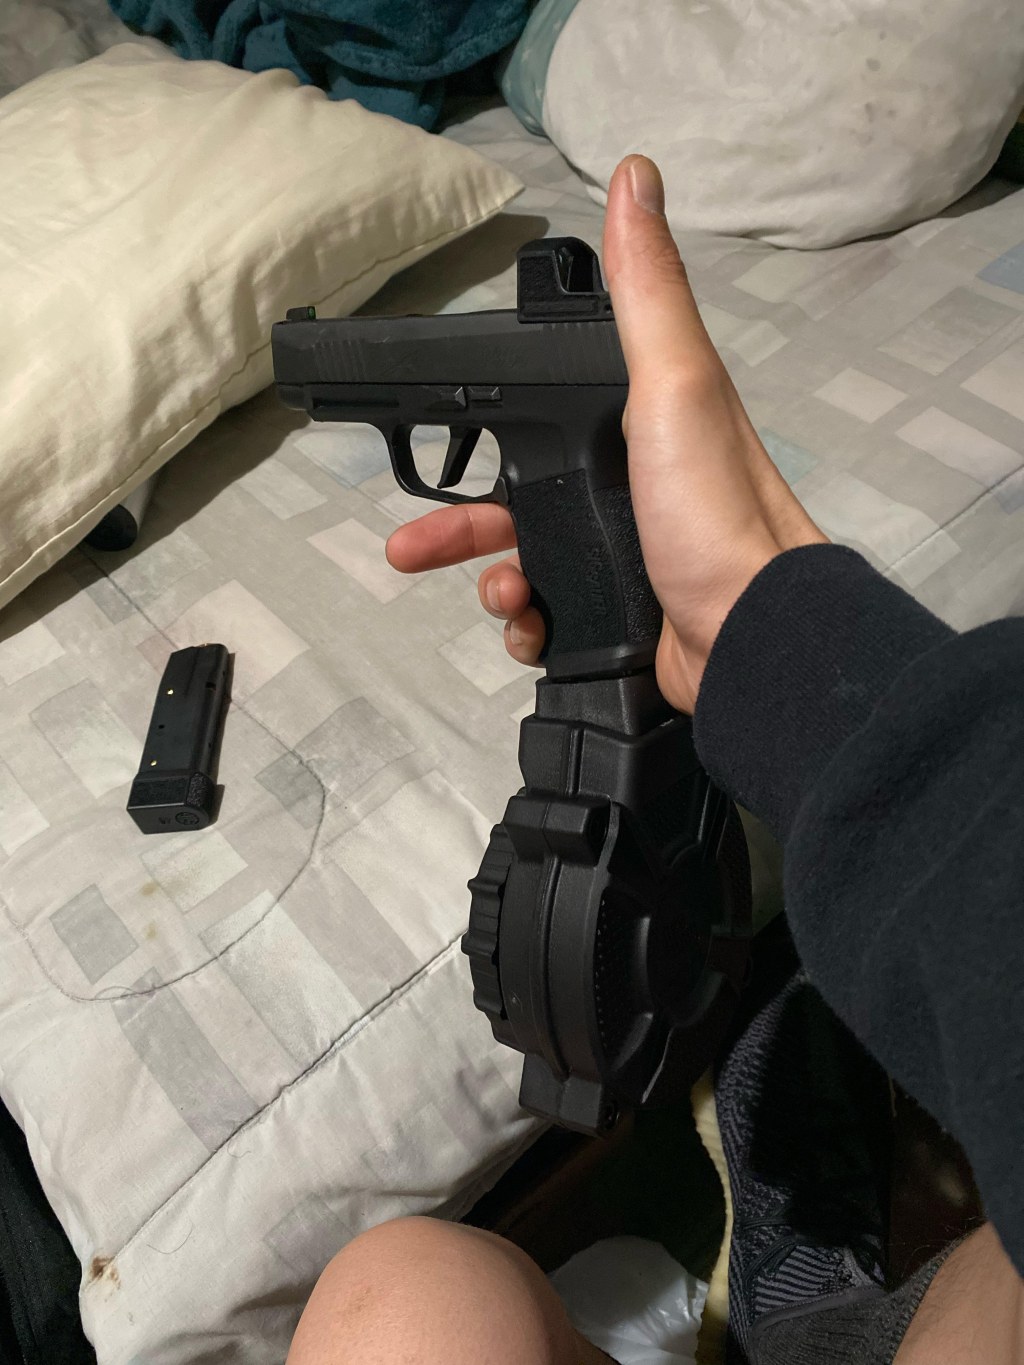 sig sauer p320 drum magazine - So I went to a gun show and saw this drum mag 😂This thing is